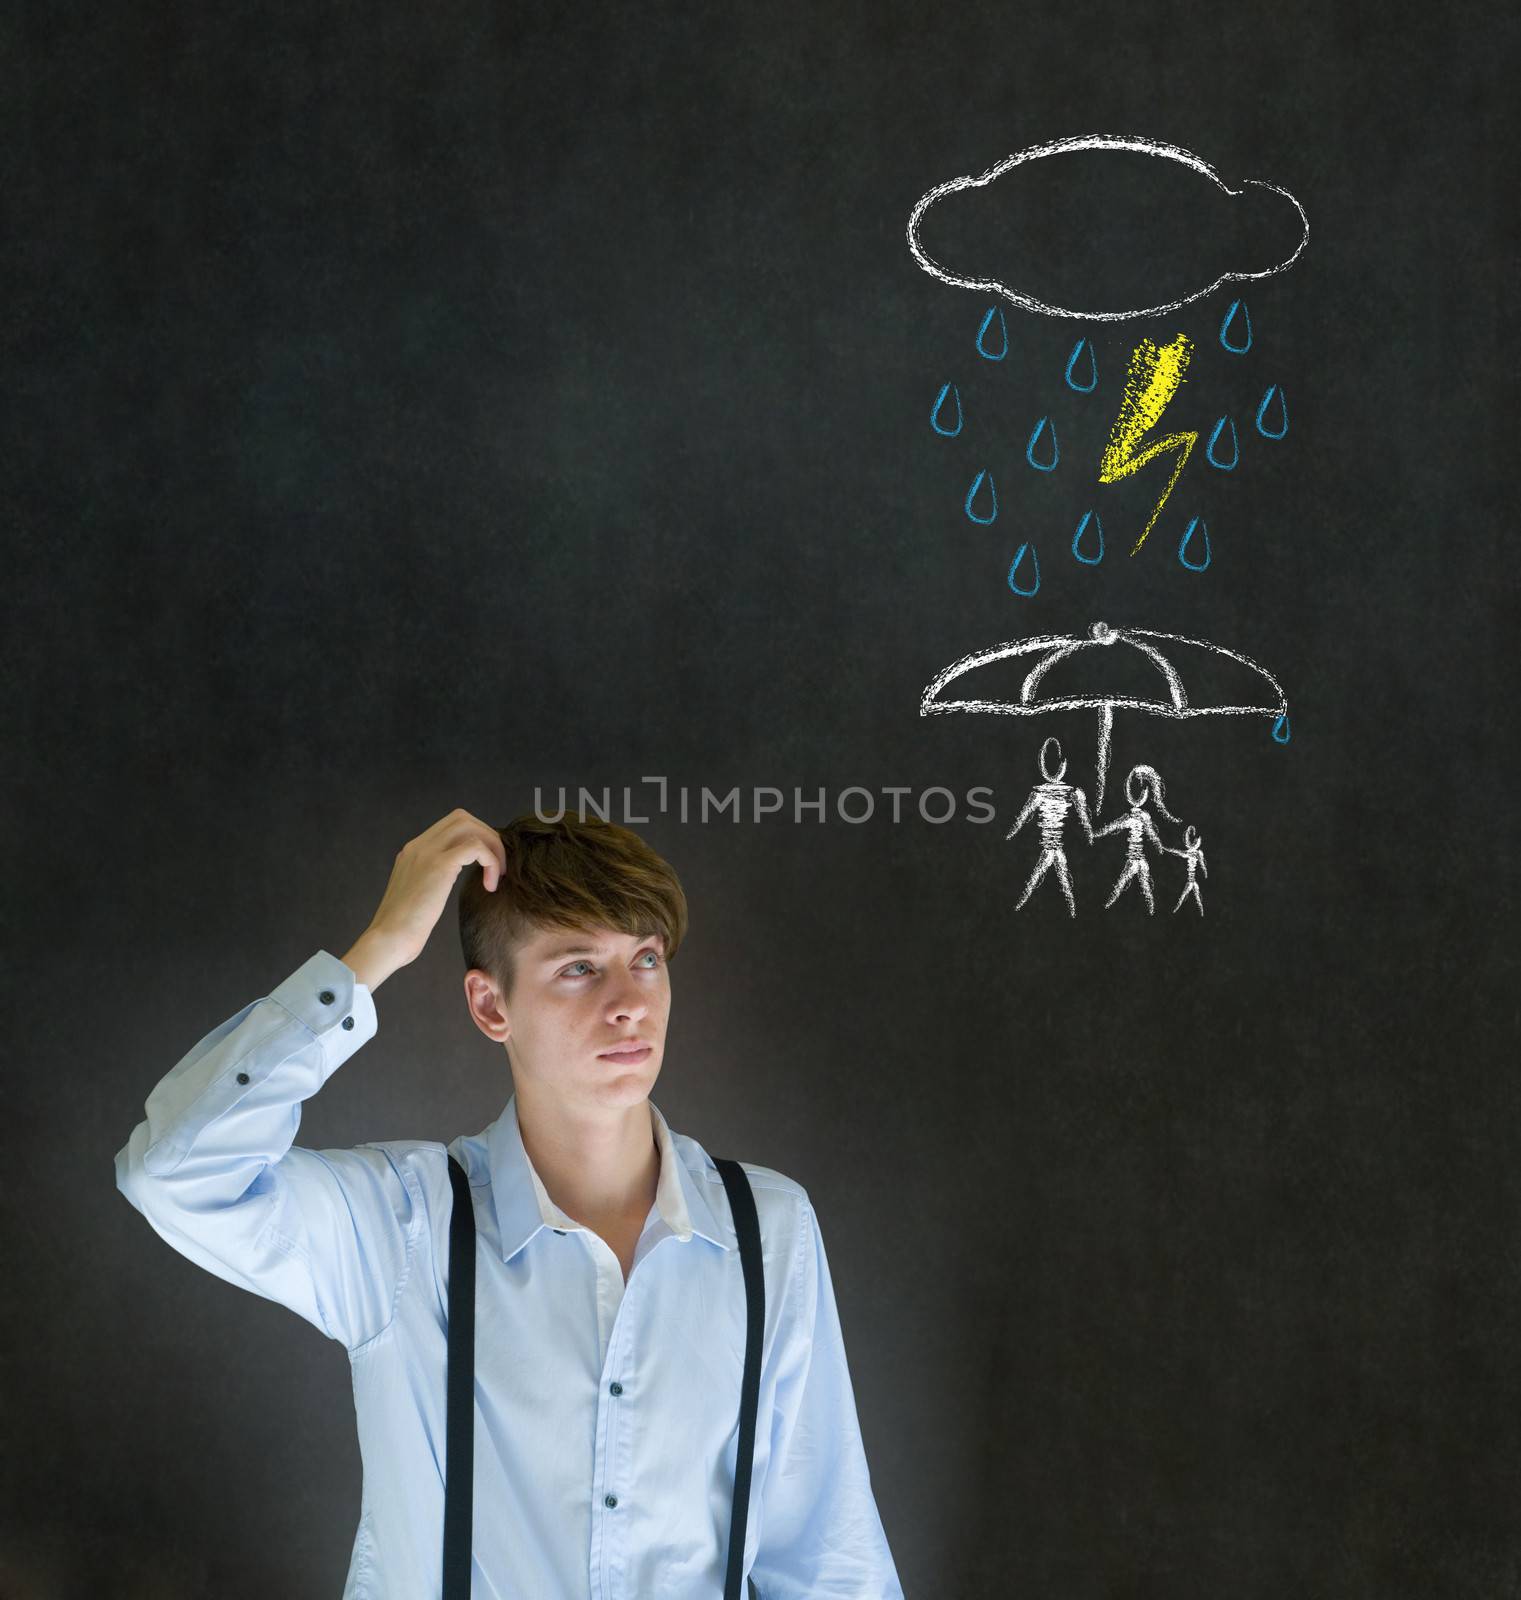 Insurance businessman thinking about protecting family from natural disaster on blackboard background by alistaircotton